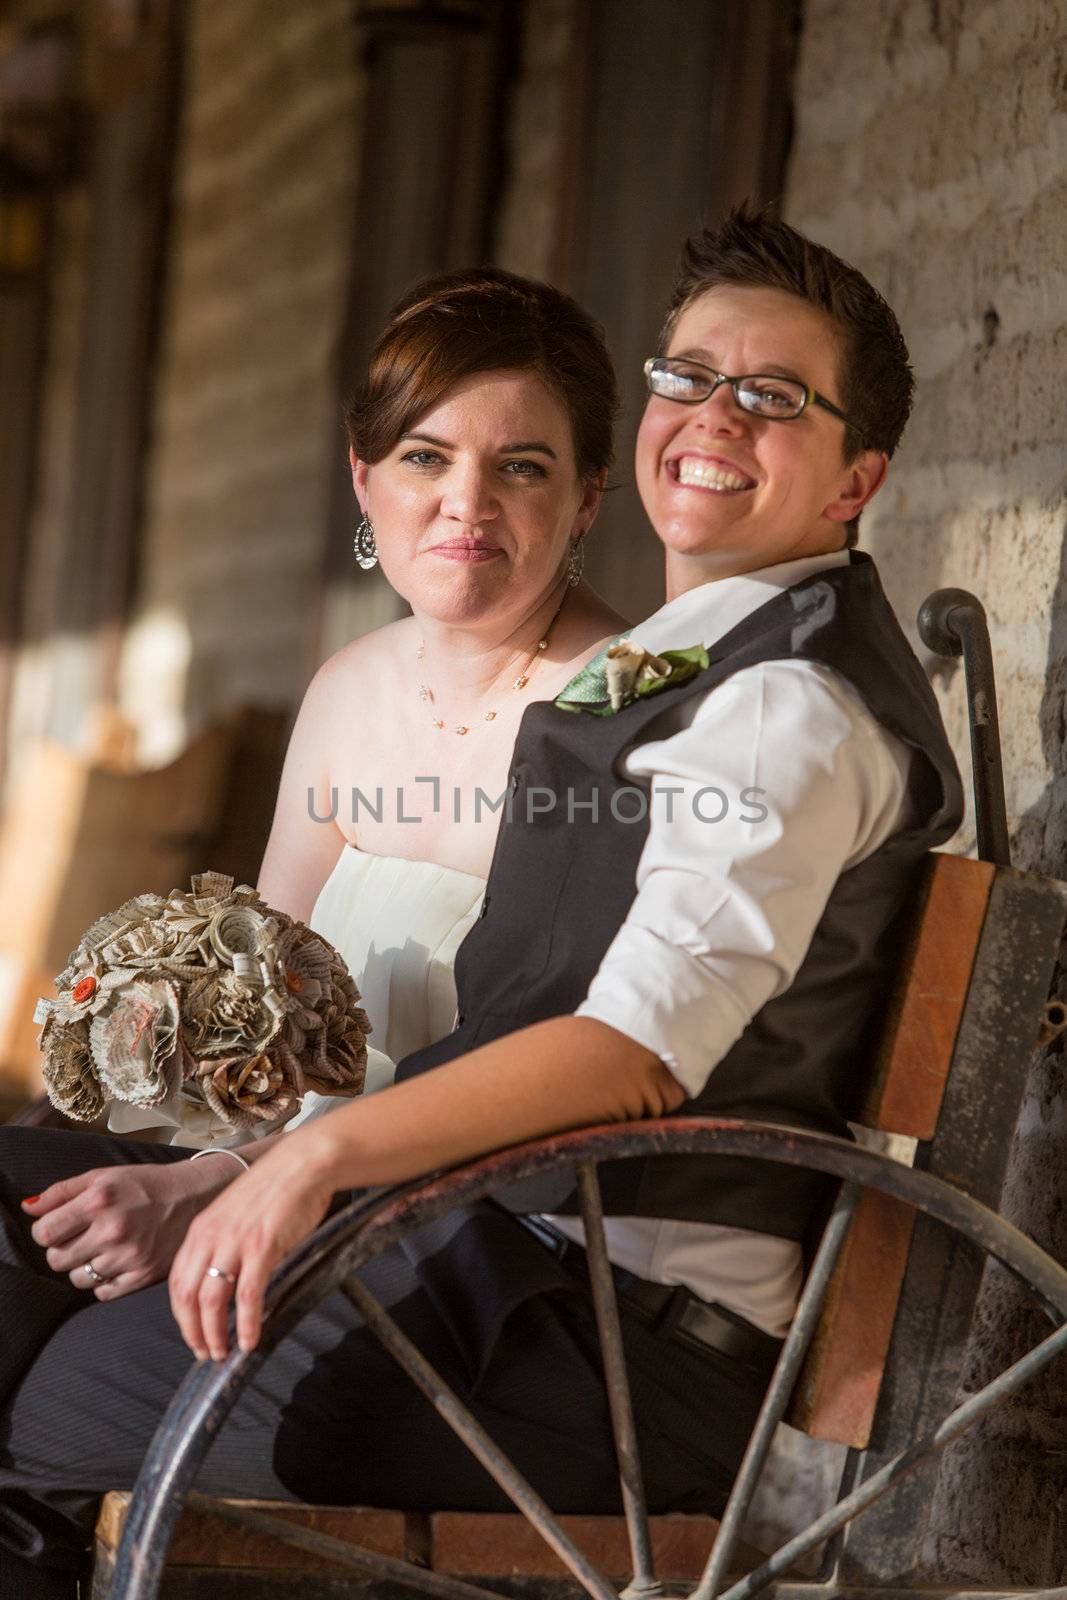 Smiling newlywed gay couple sitting on antique bench